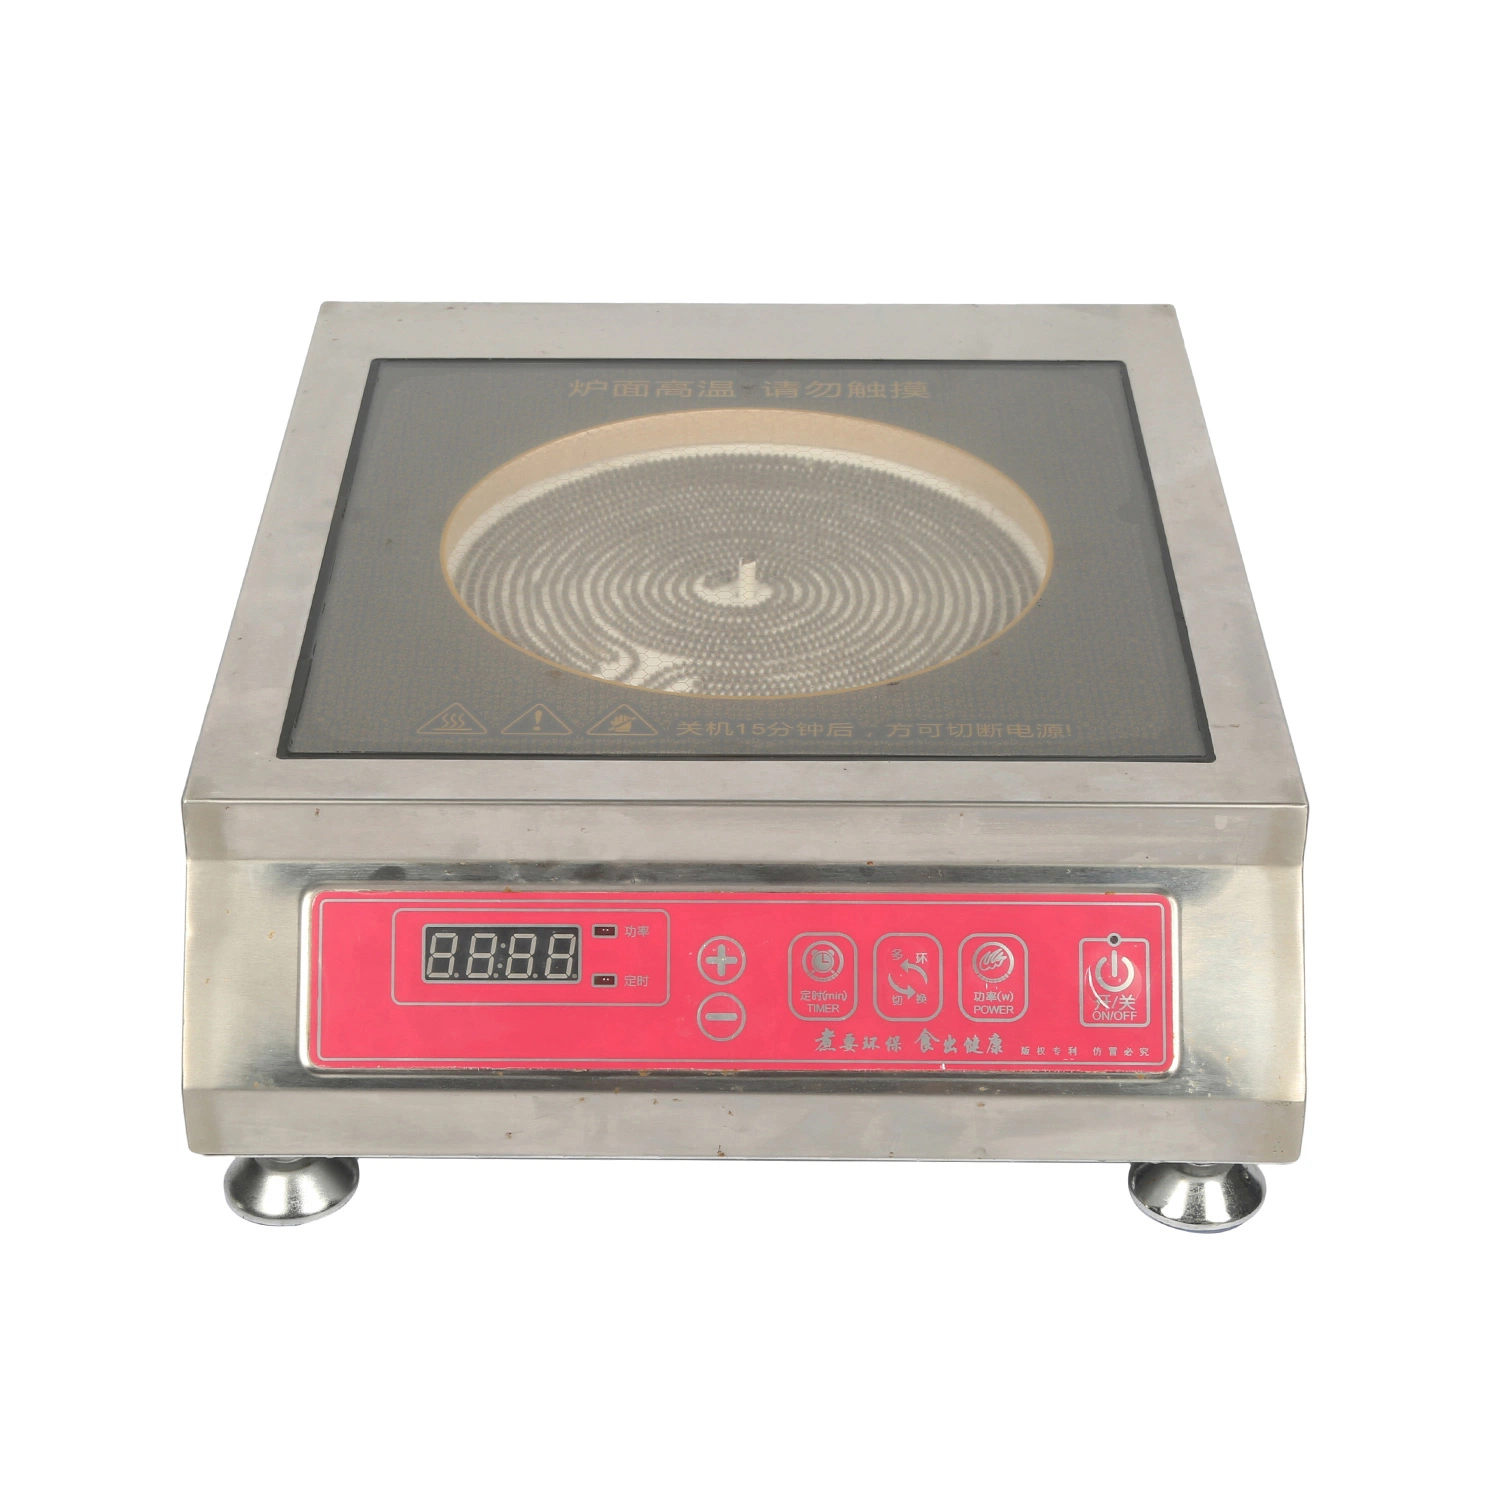 Home Use Kitchen Equipment Electric Appliance Infra Cooker Stove